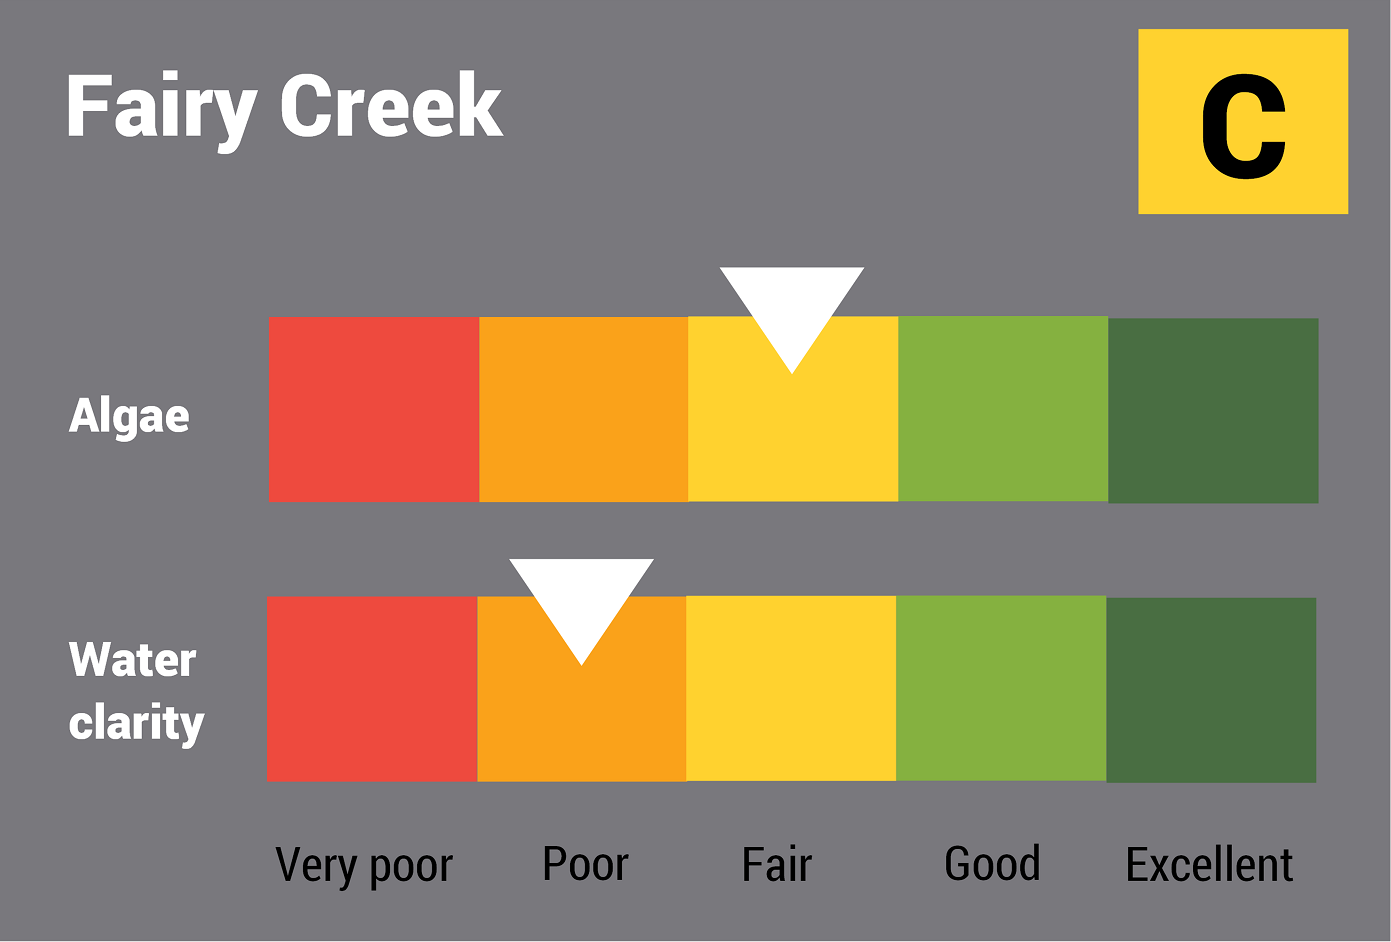 Fairy Creek water quality report card for algae and water clarity showing colour-coded ratings (red, orange, yellow, light green and dark green, which represent very poor, poor, fair, good and excellent, respectively). Algae is rated 'fair' and water clarity is rated 'poor' giving an overall rating of 'fair' or 'C'.